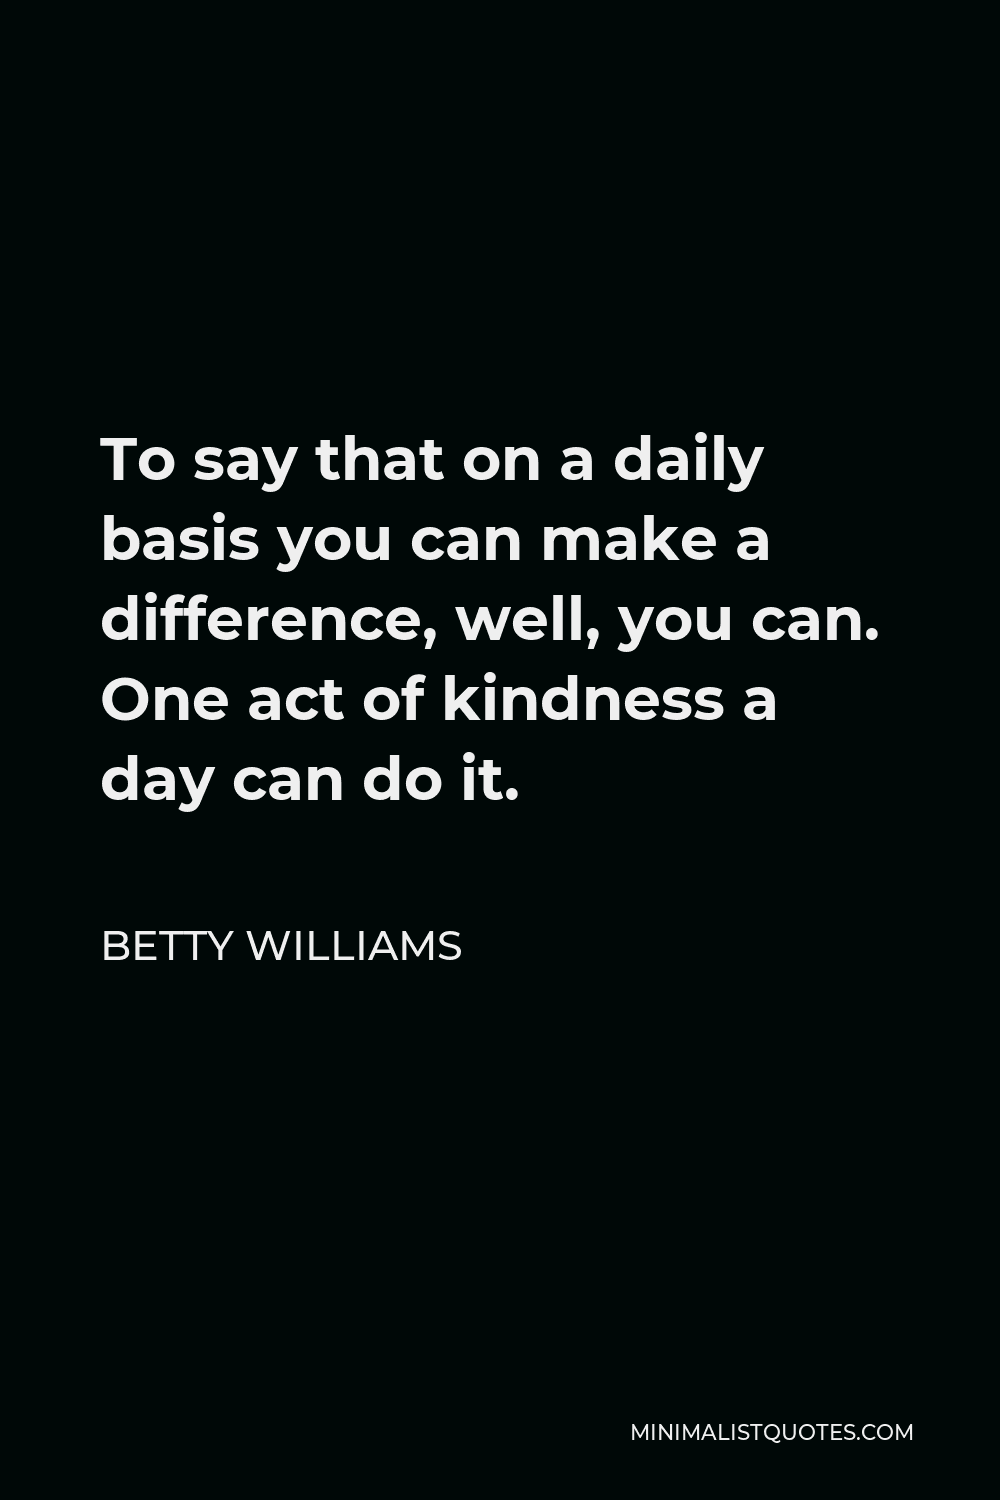 Betty Williams Quote - To say that on a daily basis you can make a difference, well, you can. One act of kindness a day can do it.